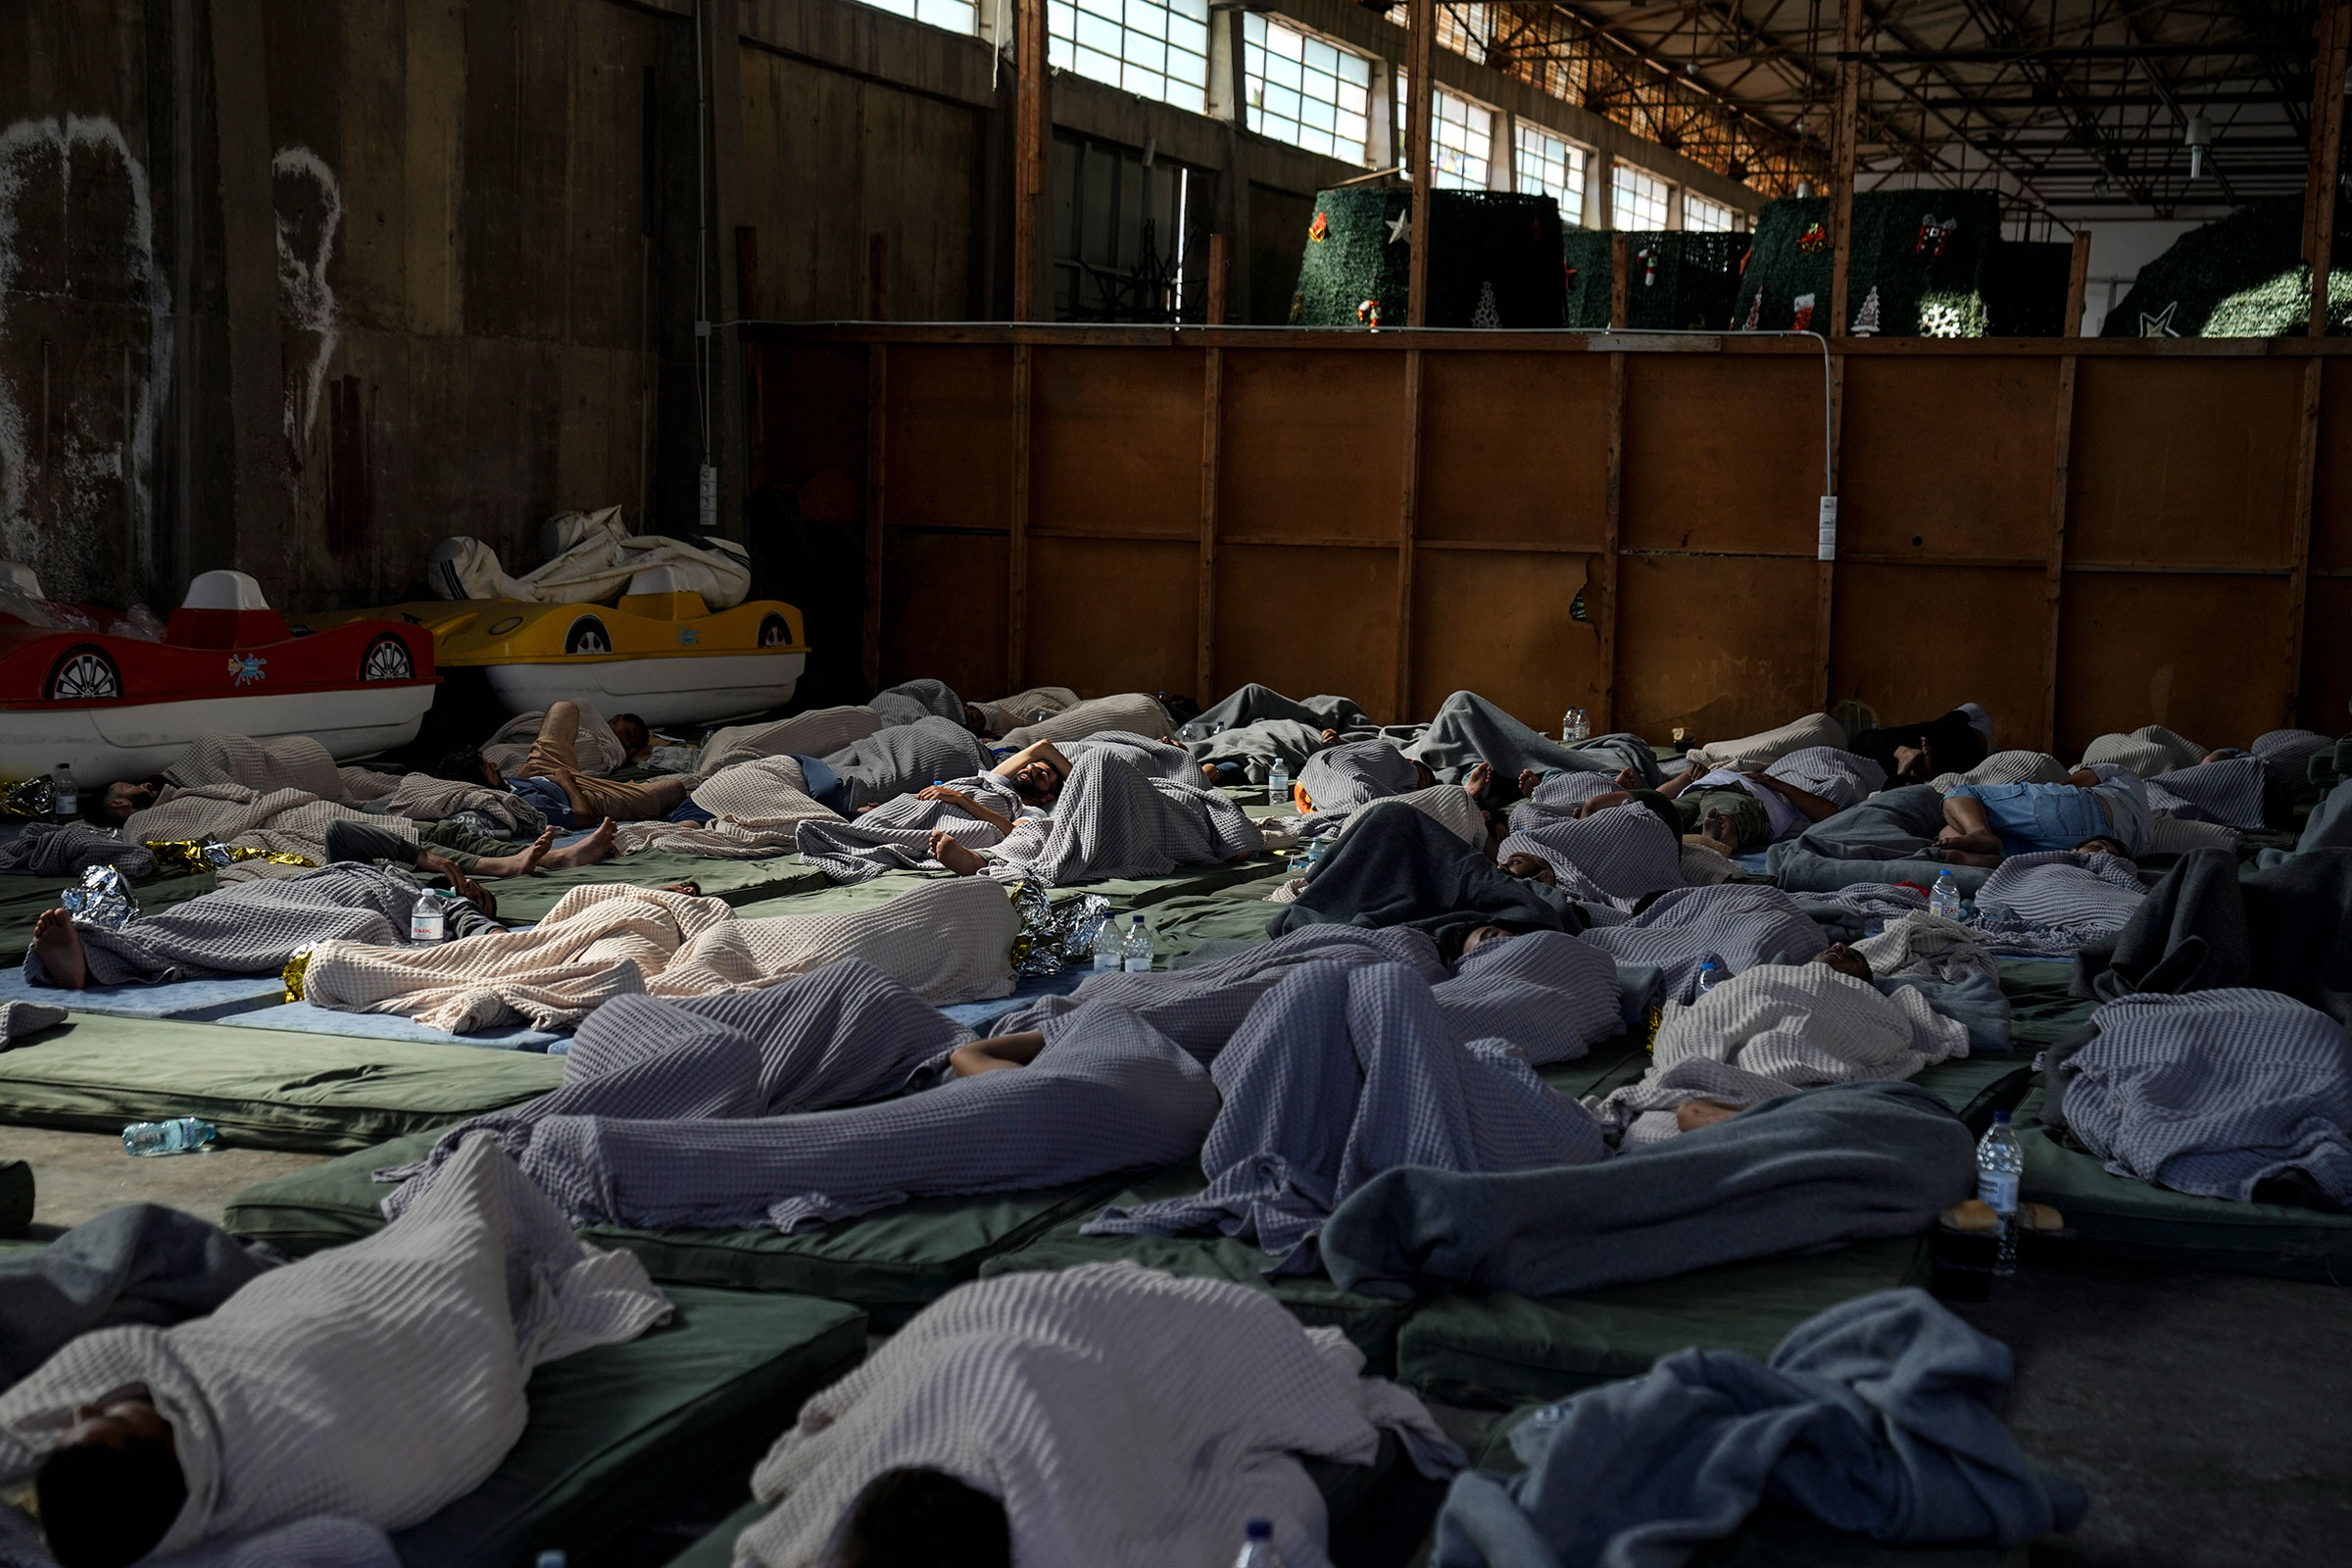 Survivors of a shipwreck sleep at a warehouse at a port in Greece